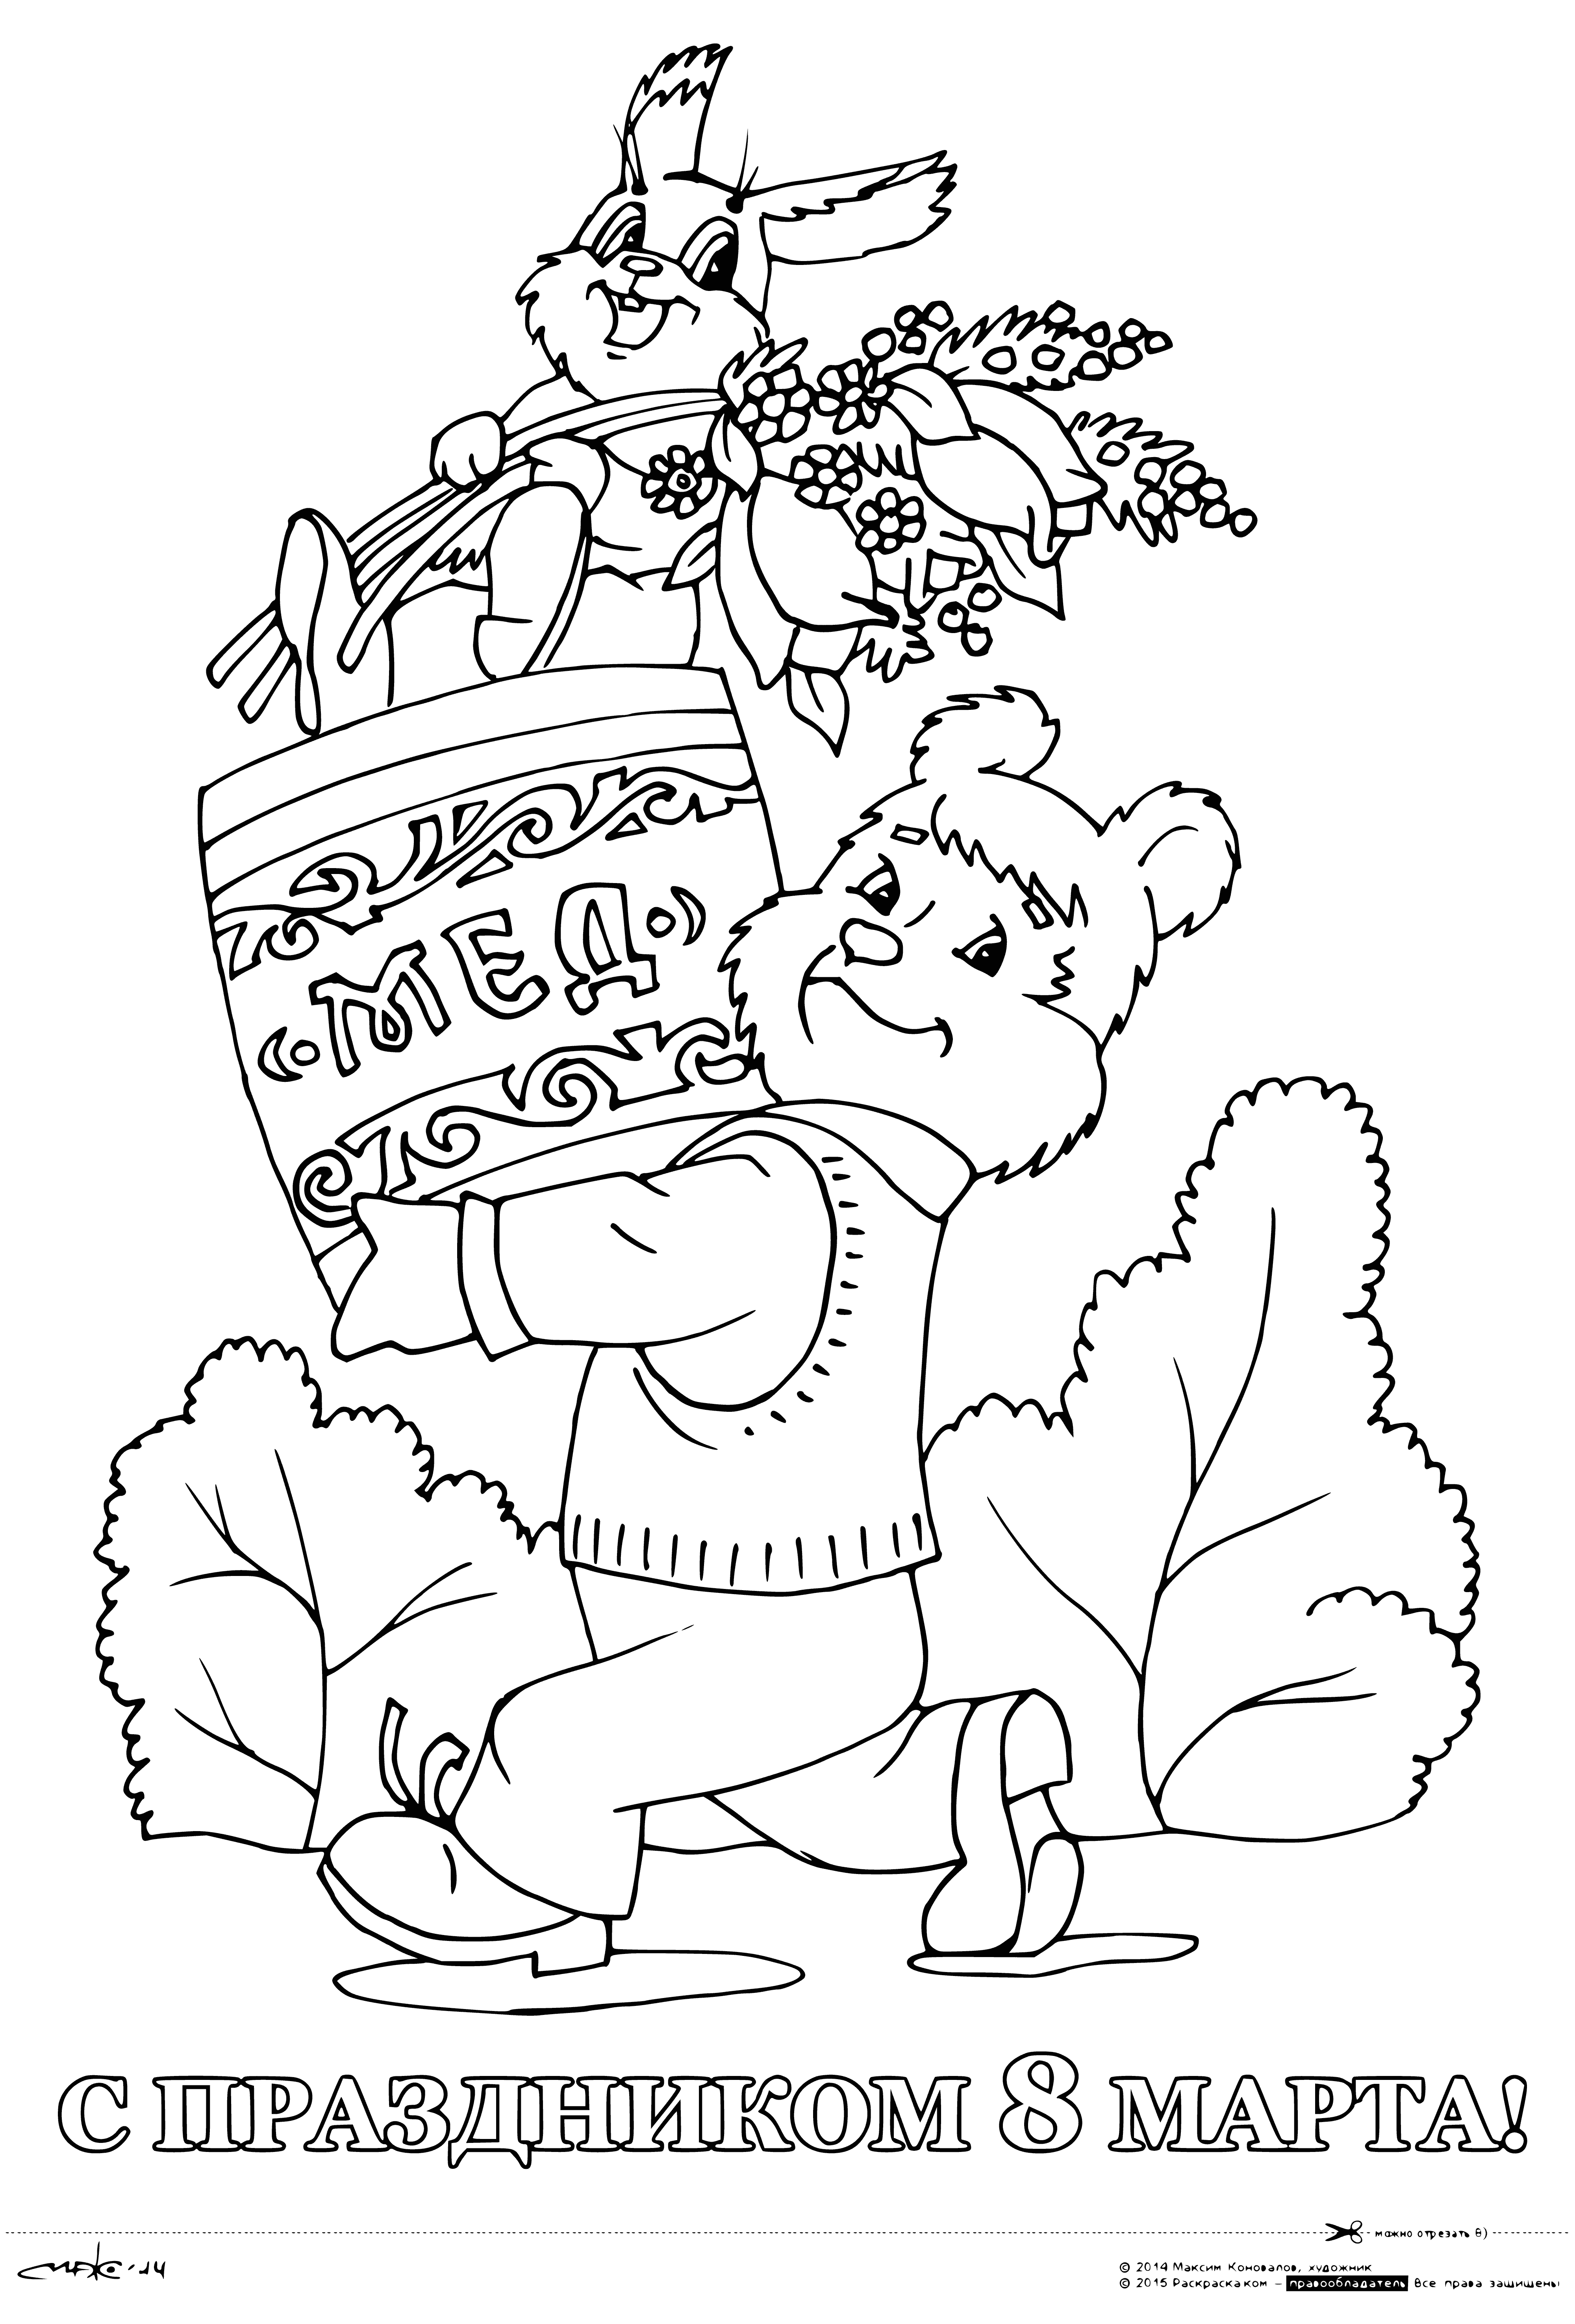 coloring page: Celebrate women's rights with an International Women's Day coloring page! Signs say "Equal rights," "Human Rights," & "Justice for all women."